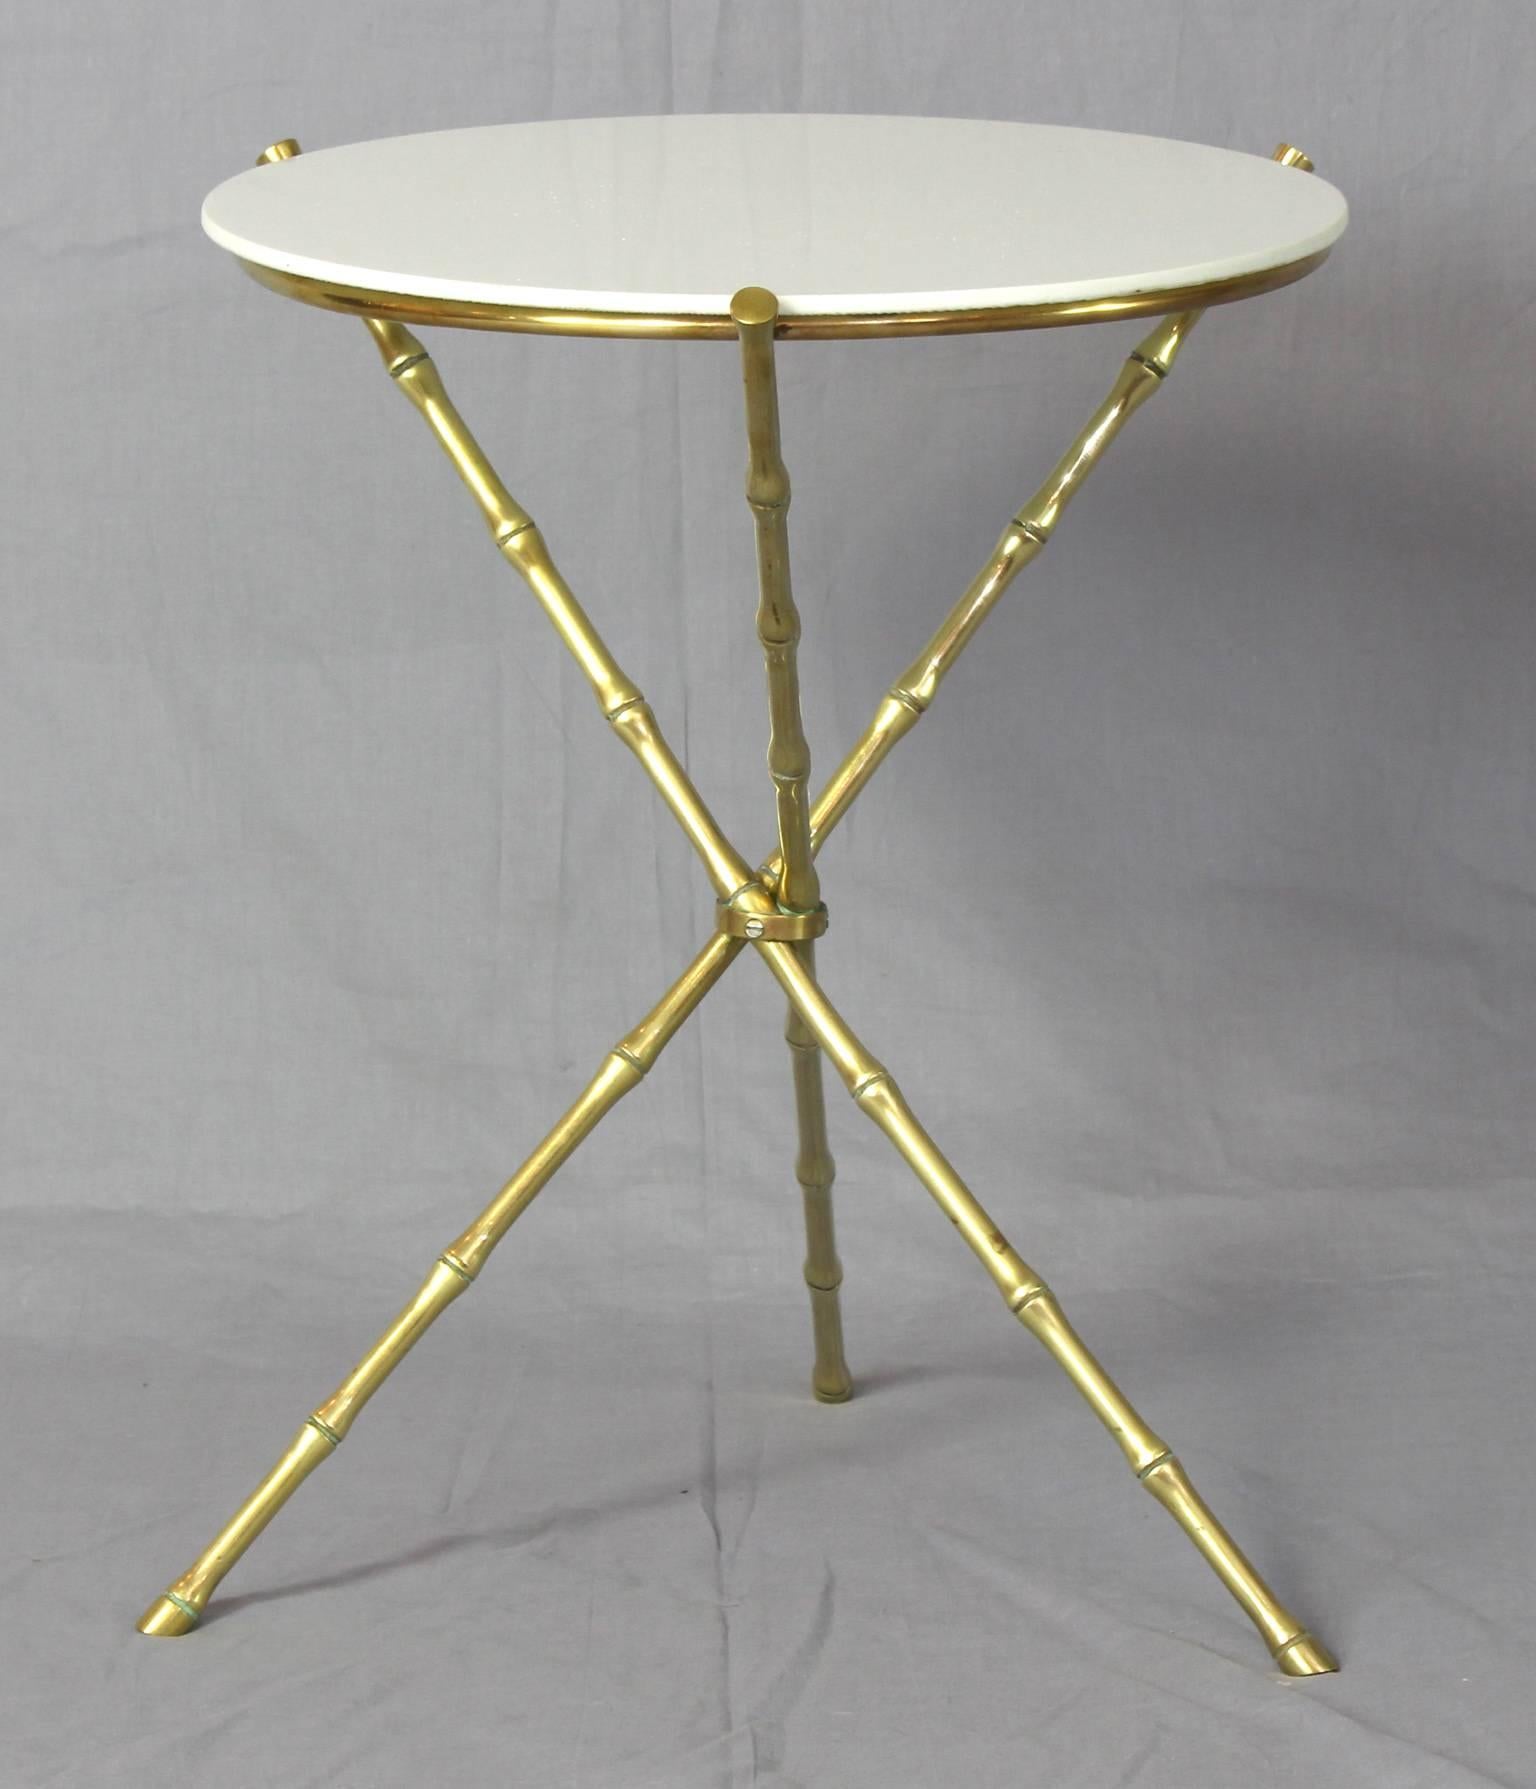 A charming mid-20th century cast brass faux bamboo side table by Maison Bagues inset with white glass top.